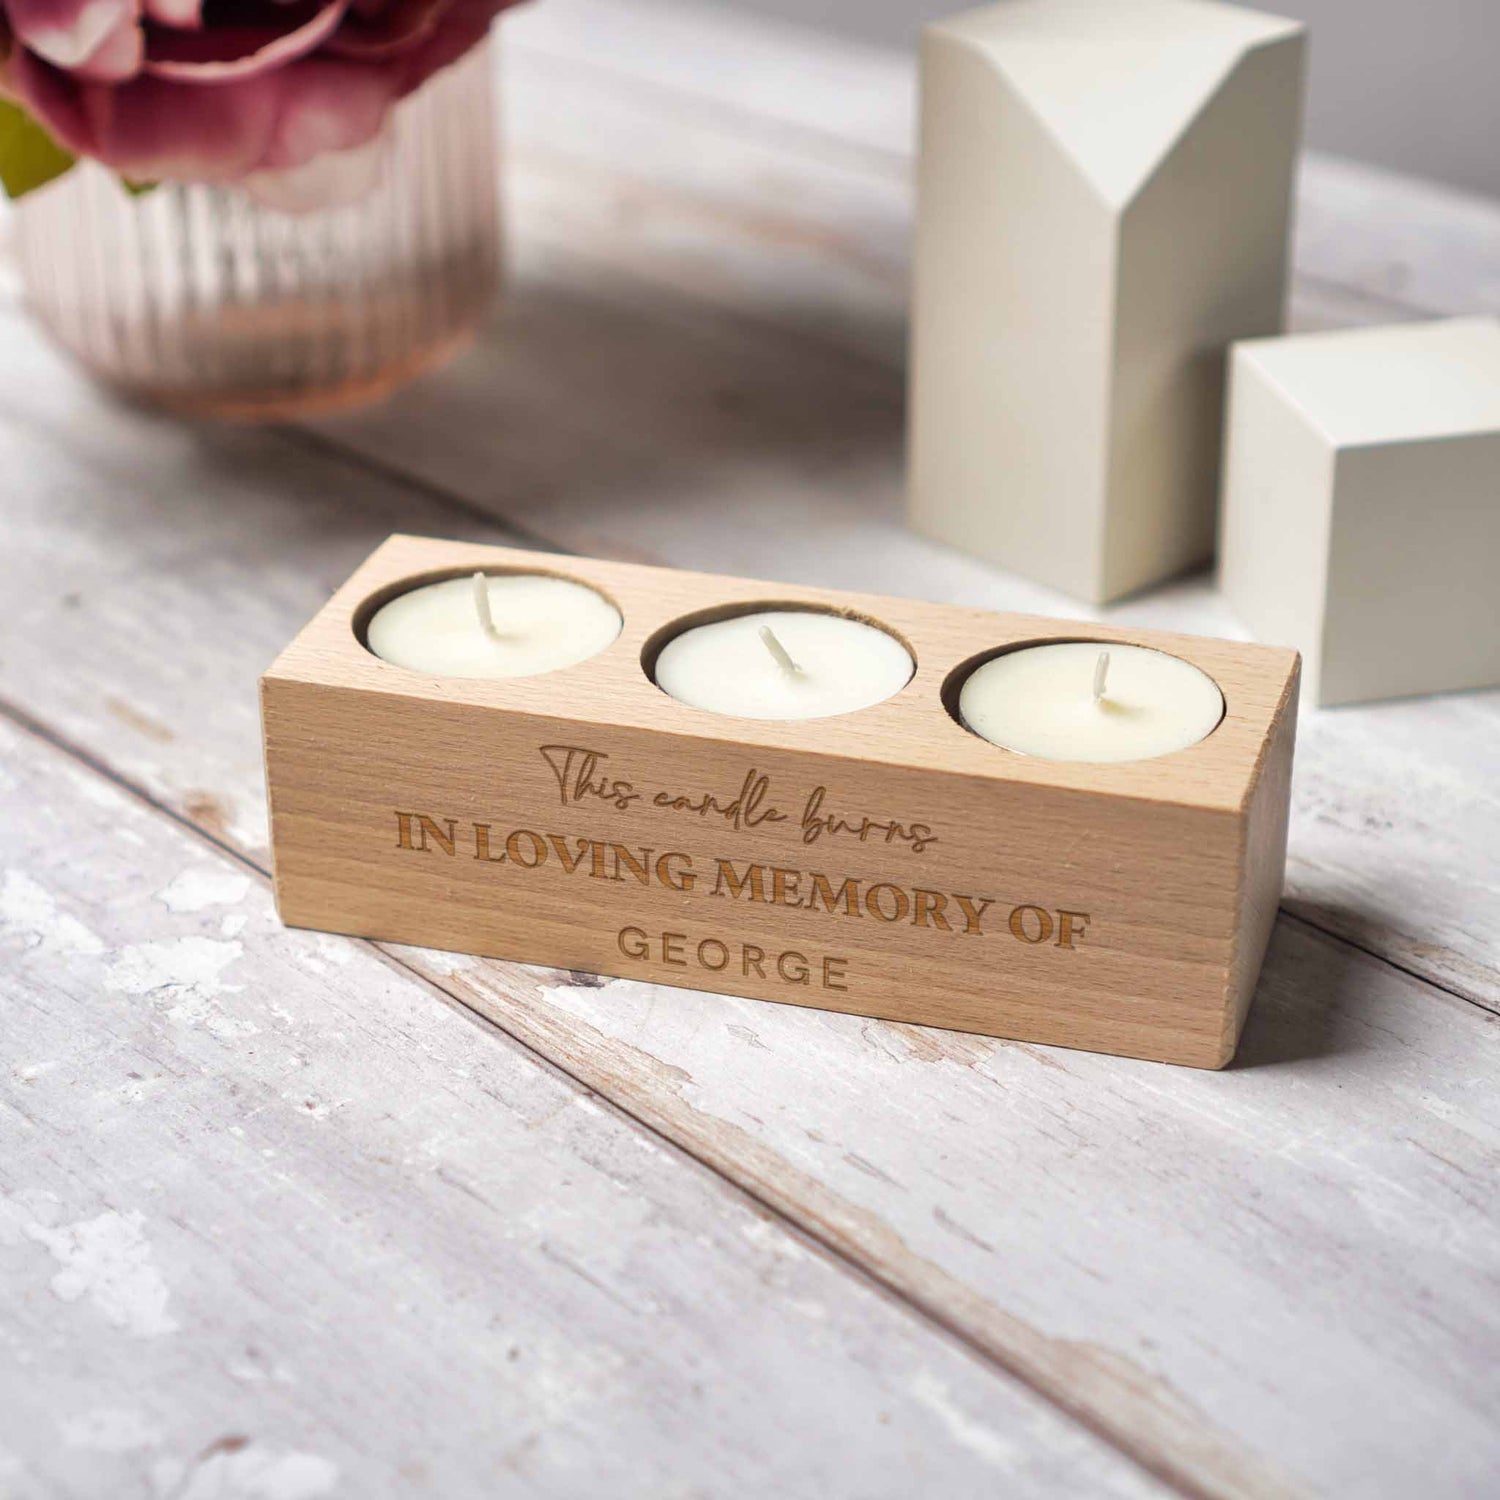 In loving memory candle holder